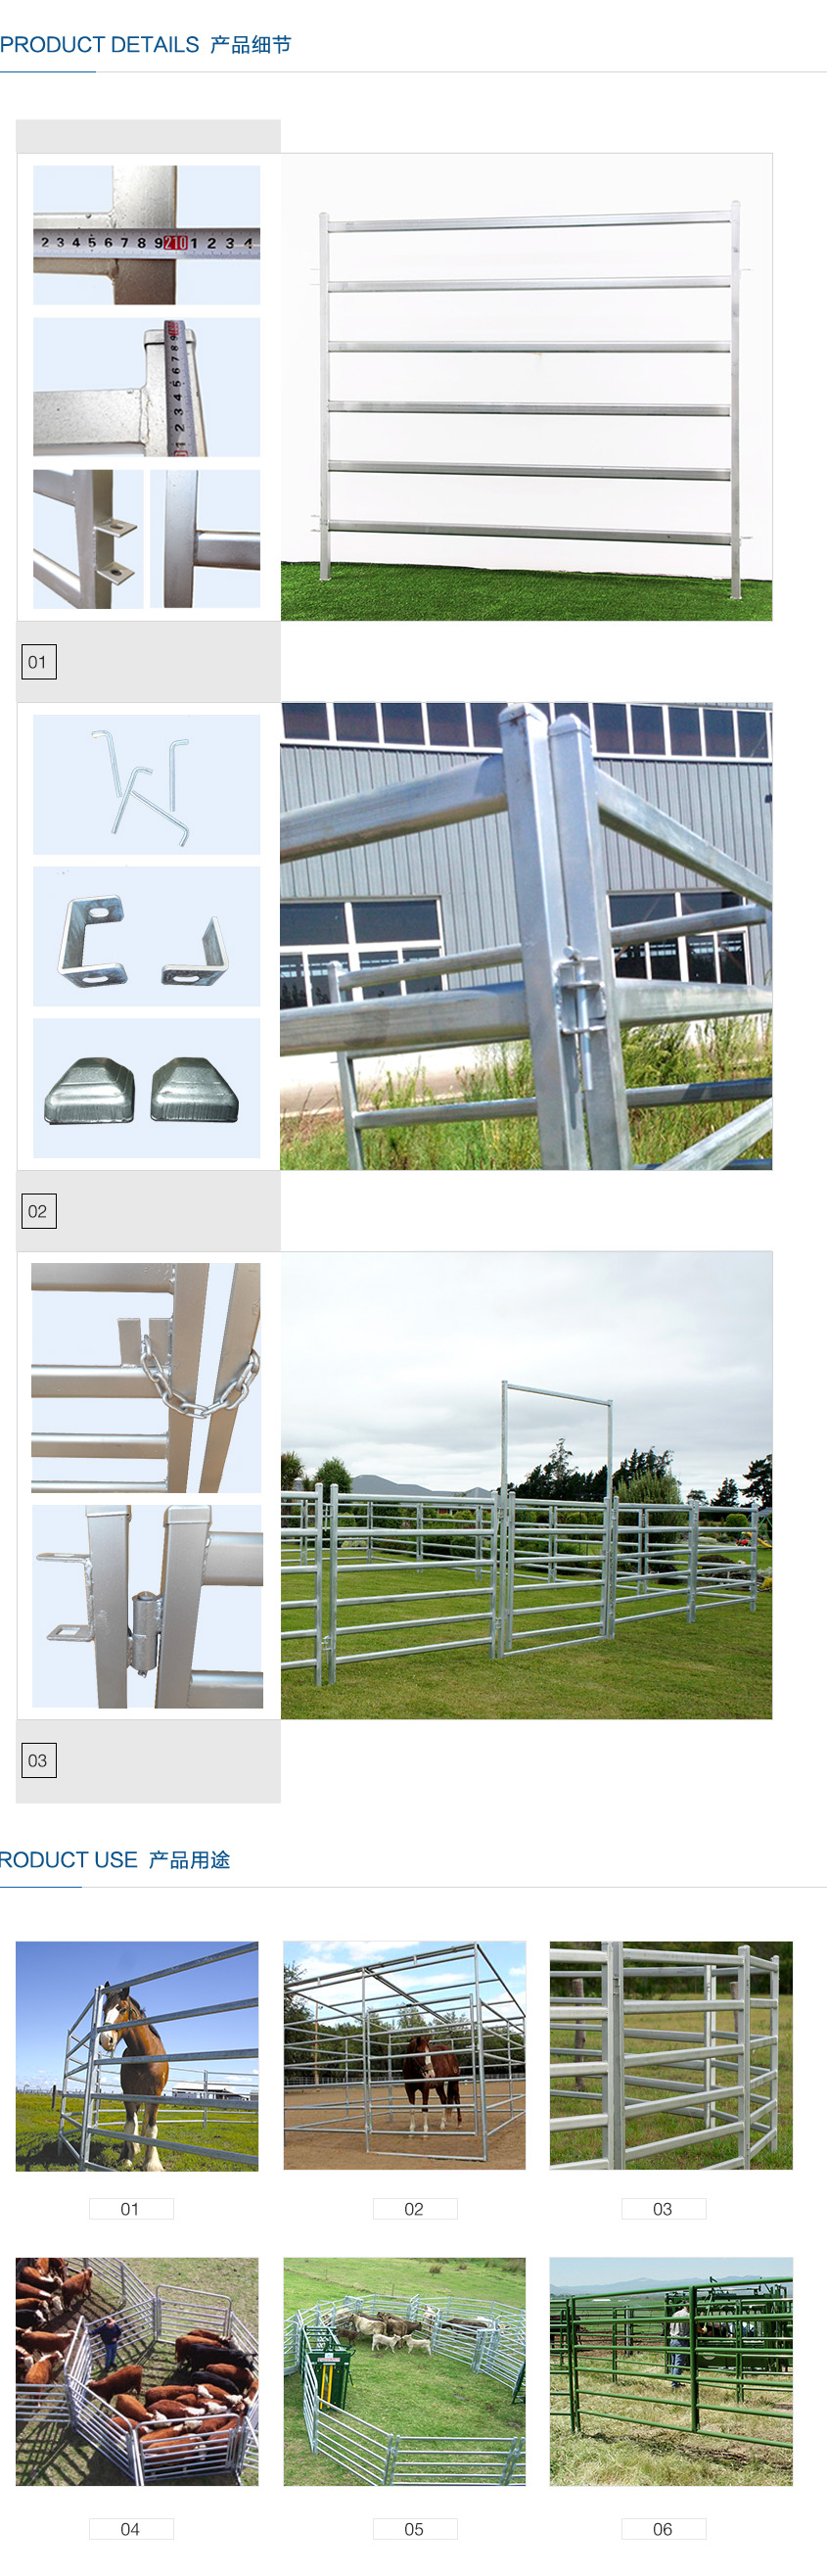 cattle fence panel